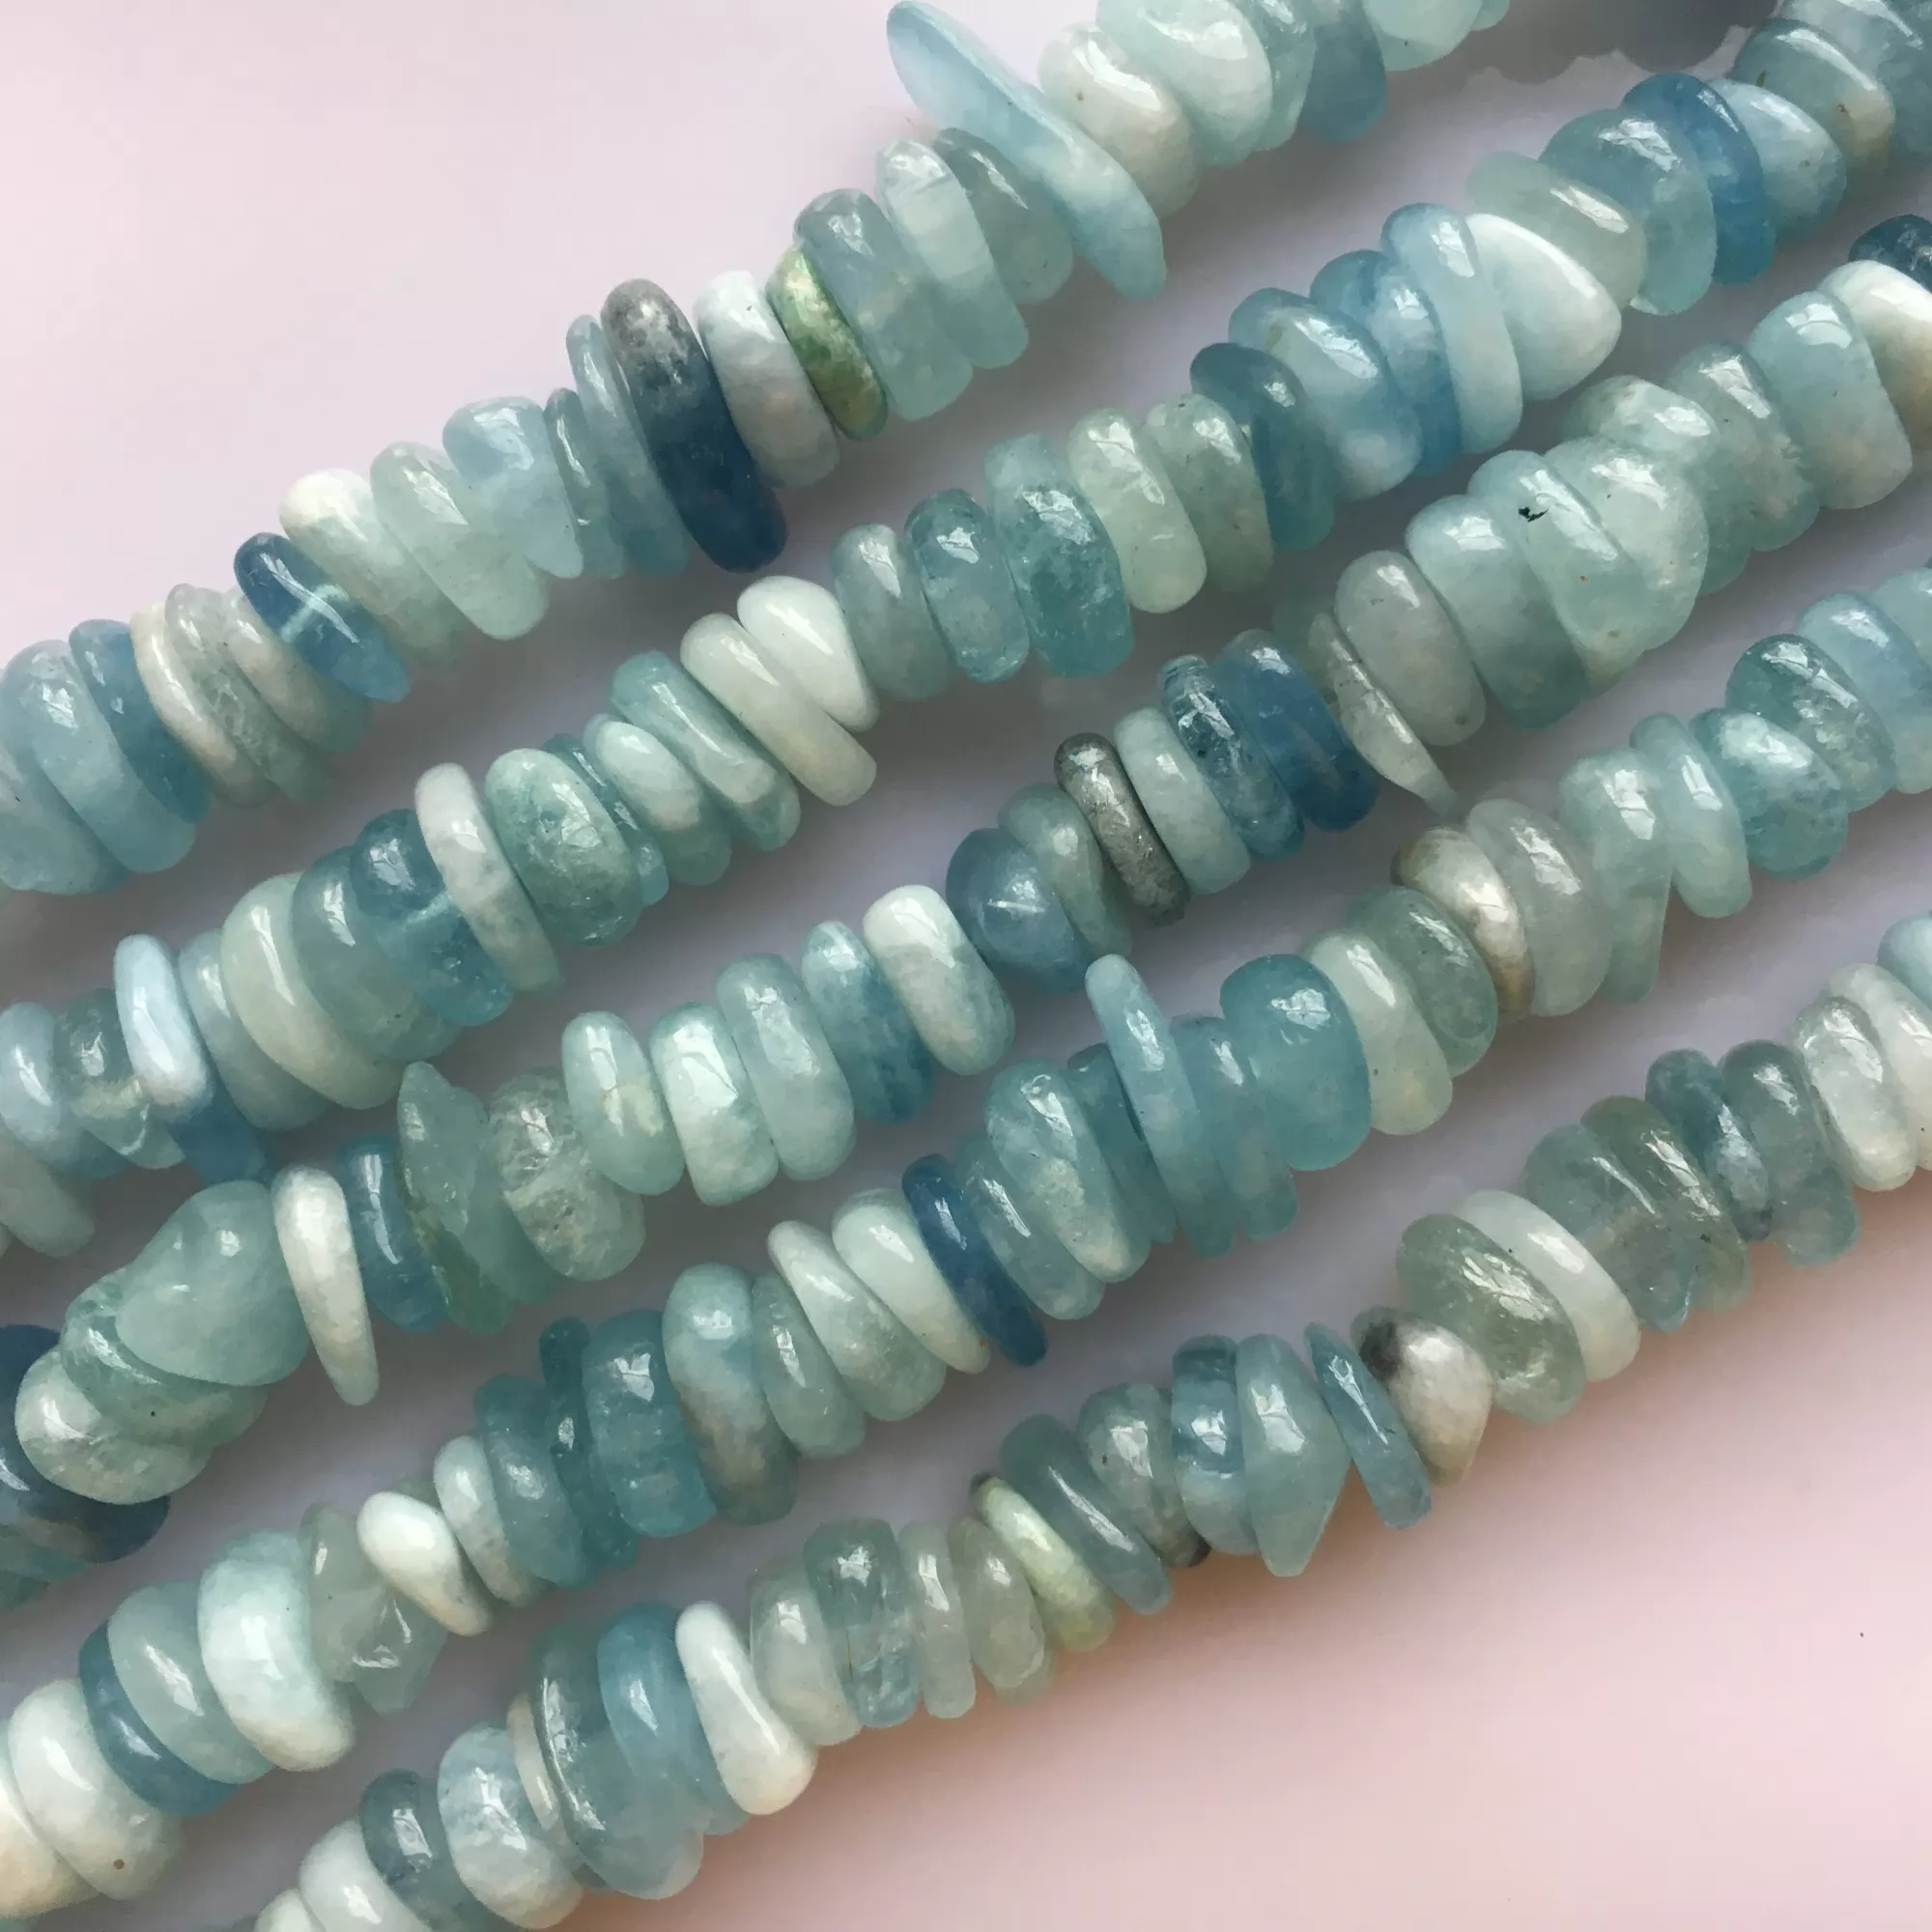 Aquamarine, Chunky Chips, Approx 8-15mm, Approx 380mm